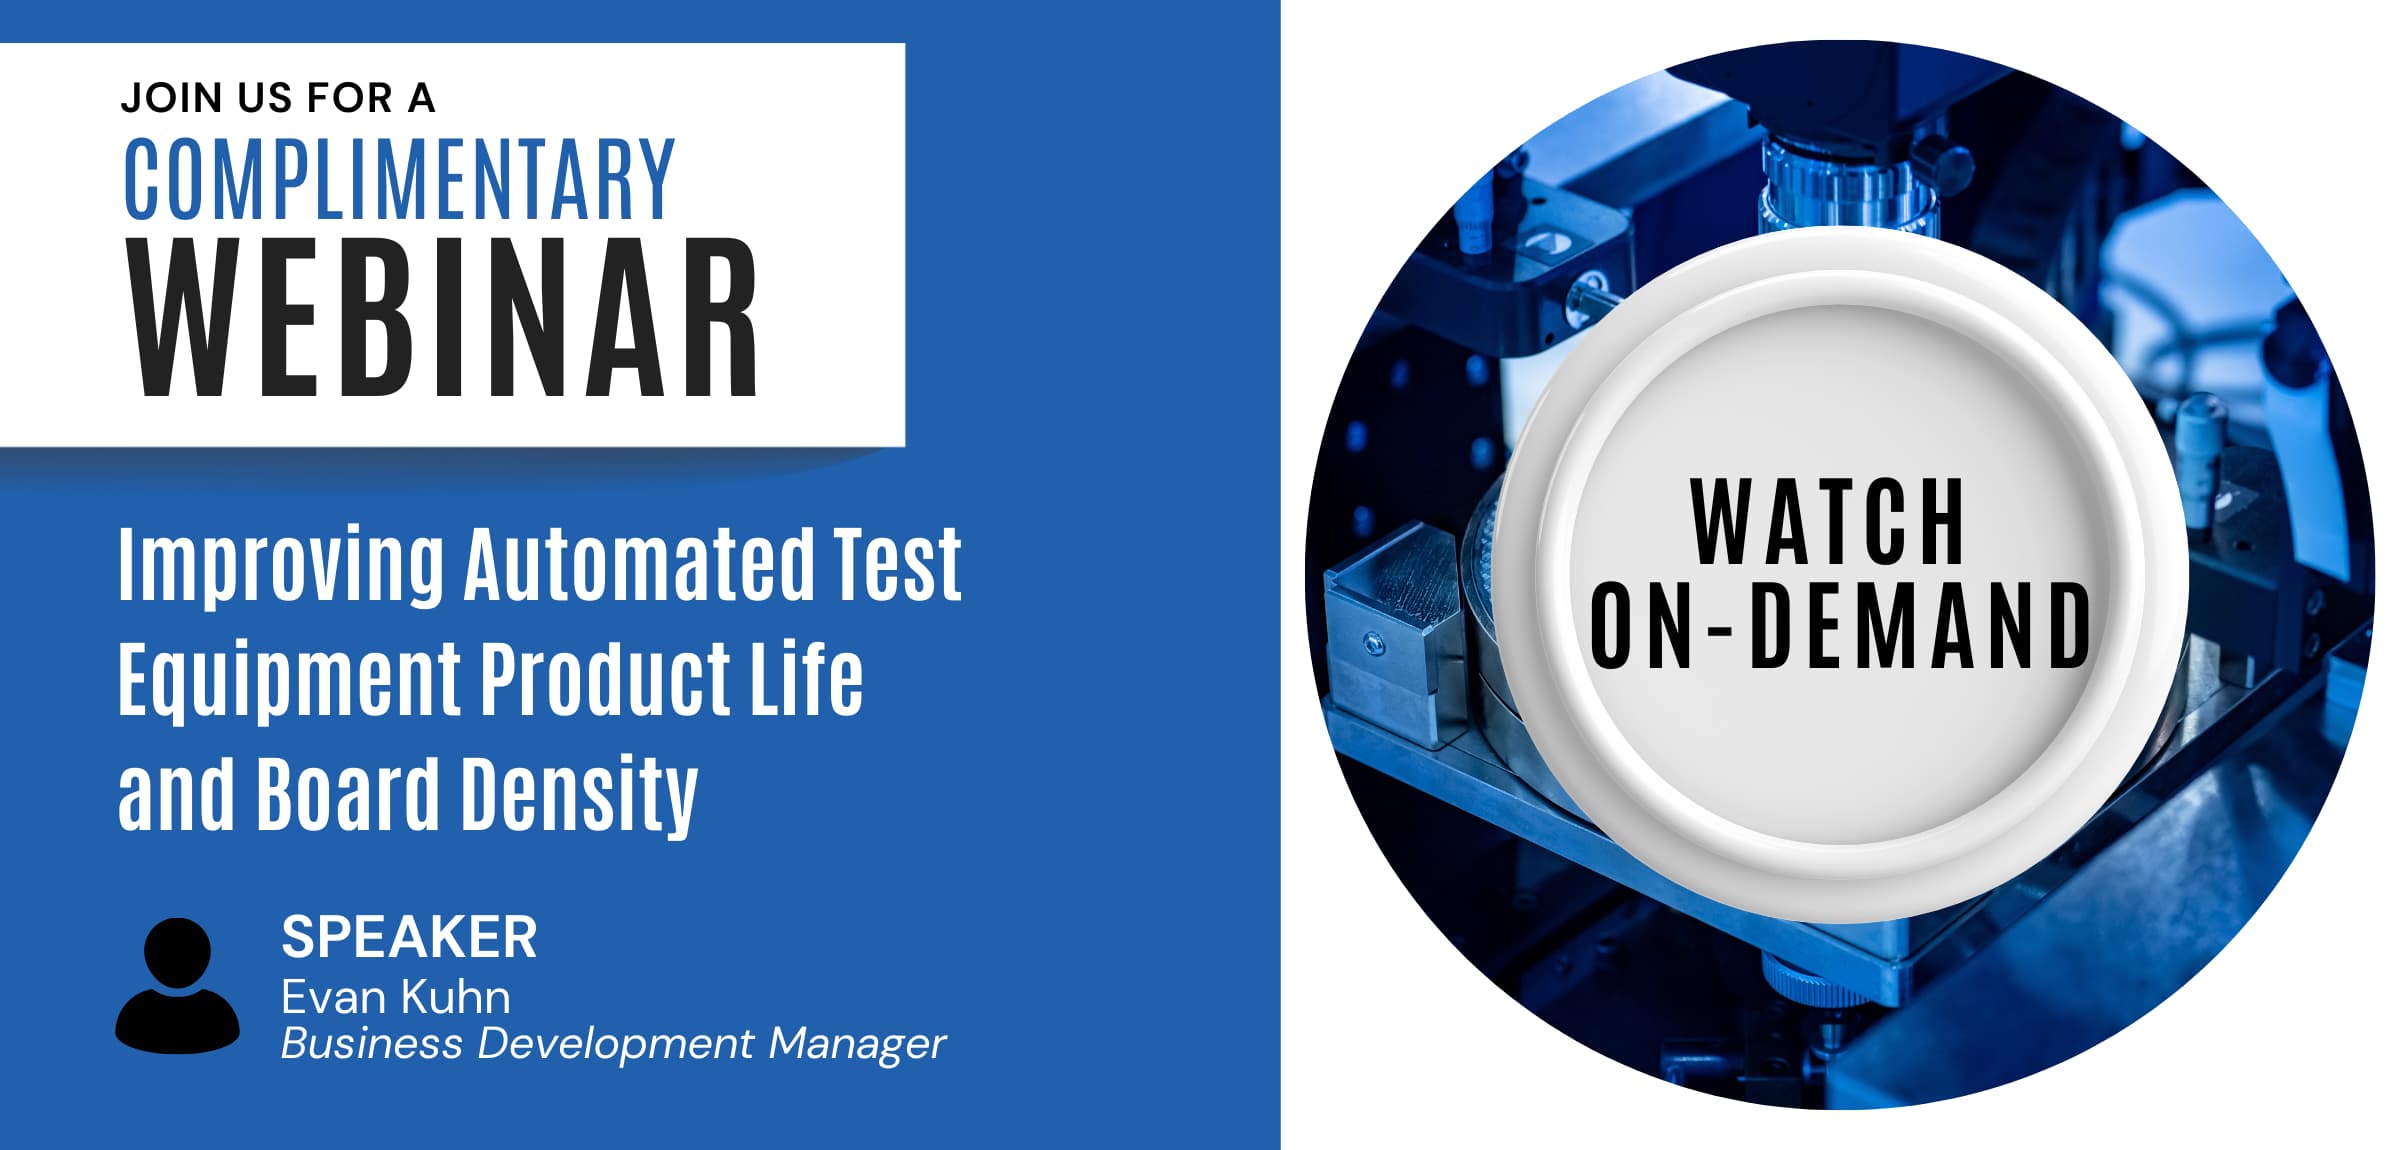 JOIN US FOR A COMPLIMENTARY WEBINAR | Improving Automated Test Equipment Product Life and Board Density | SPEAKER Evan Kuhn Business Development Manager | WATCH ON-DEMAND